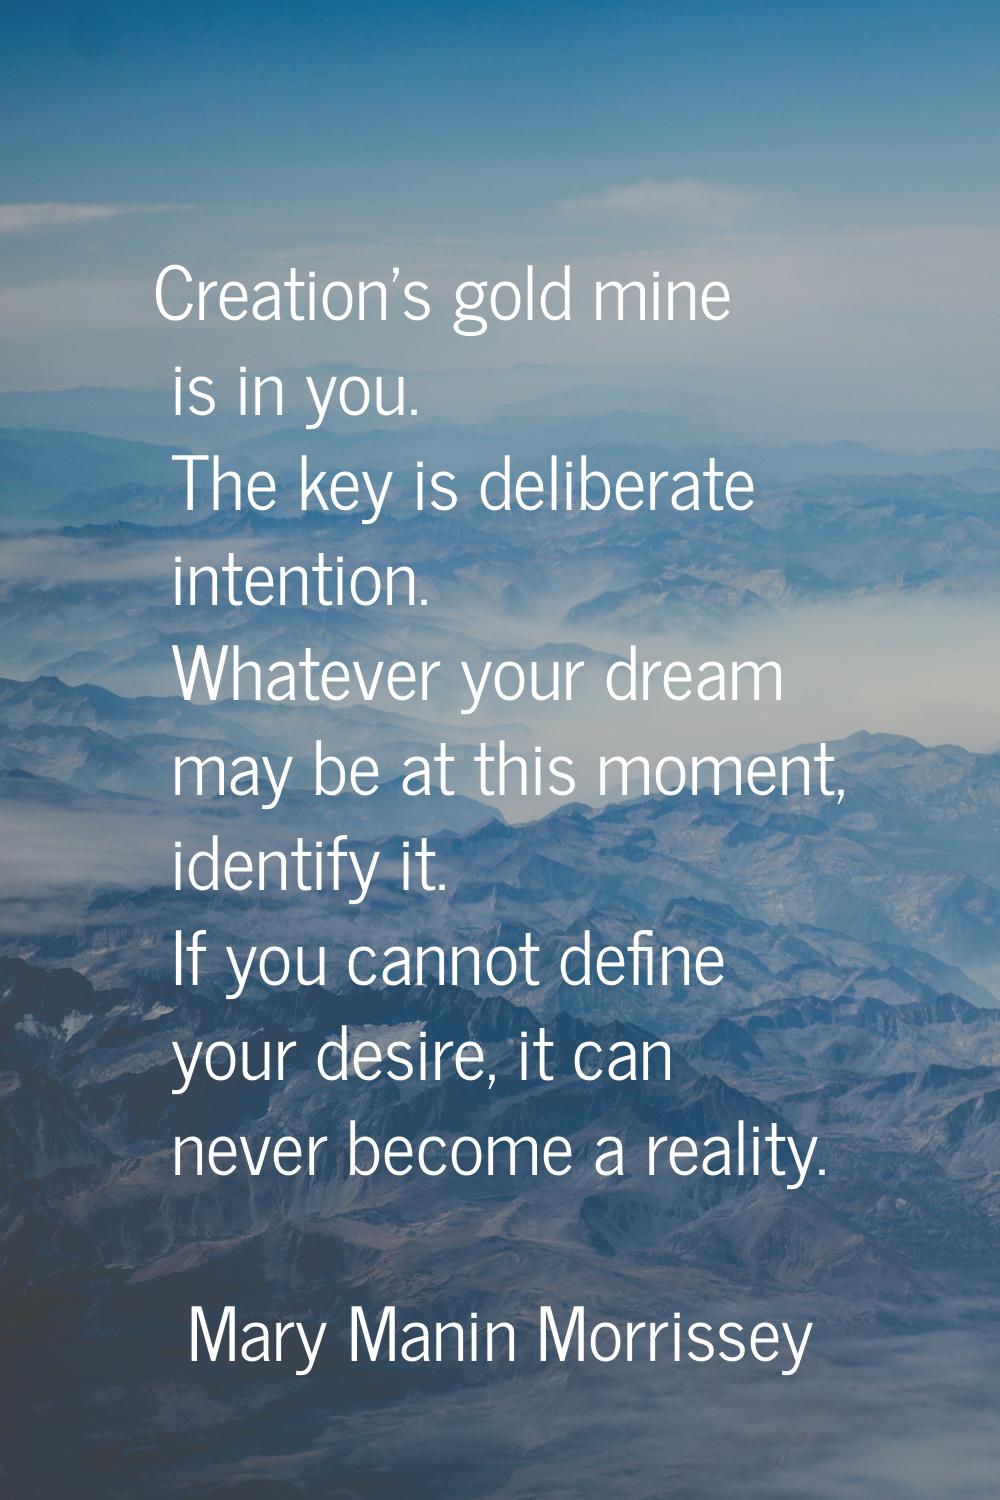 Creation's gold mine is in you. The key is deliberate intention. Whatever your dream may be at this